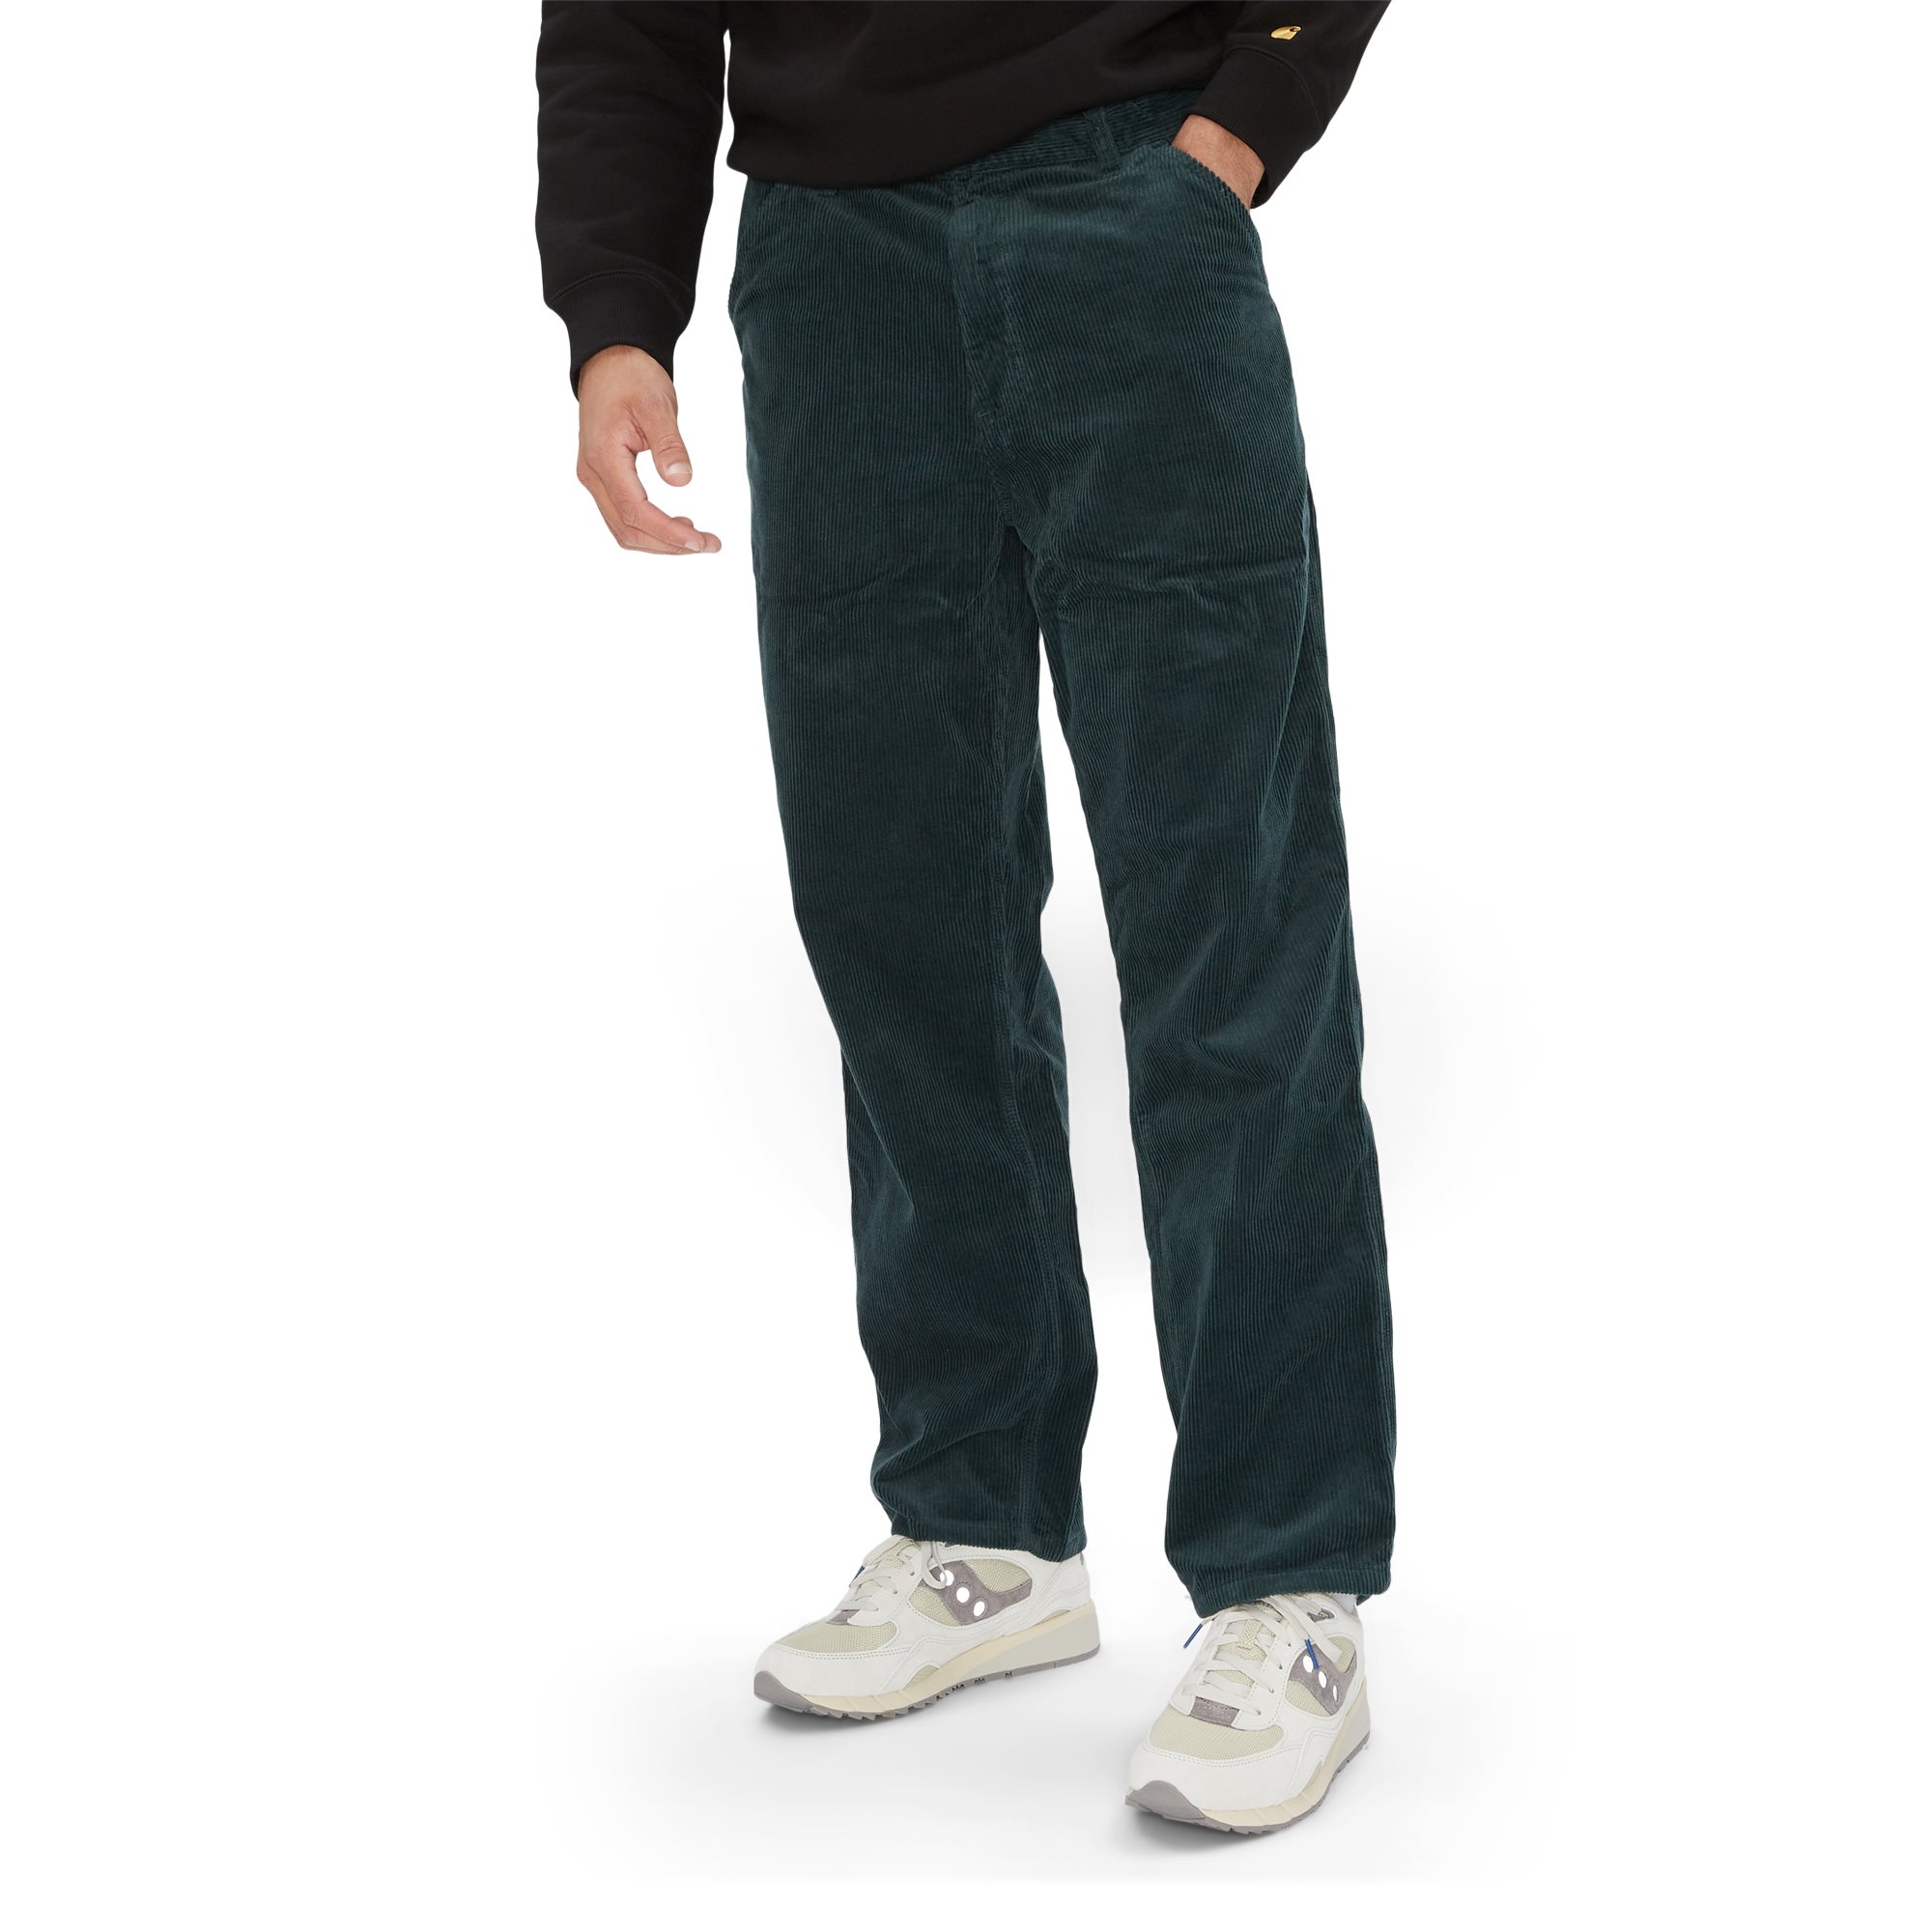 Simple Pant Jeans - Trousers - Green